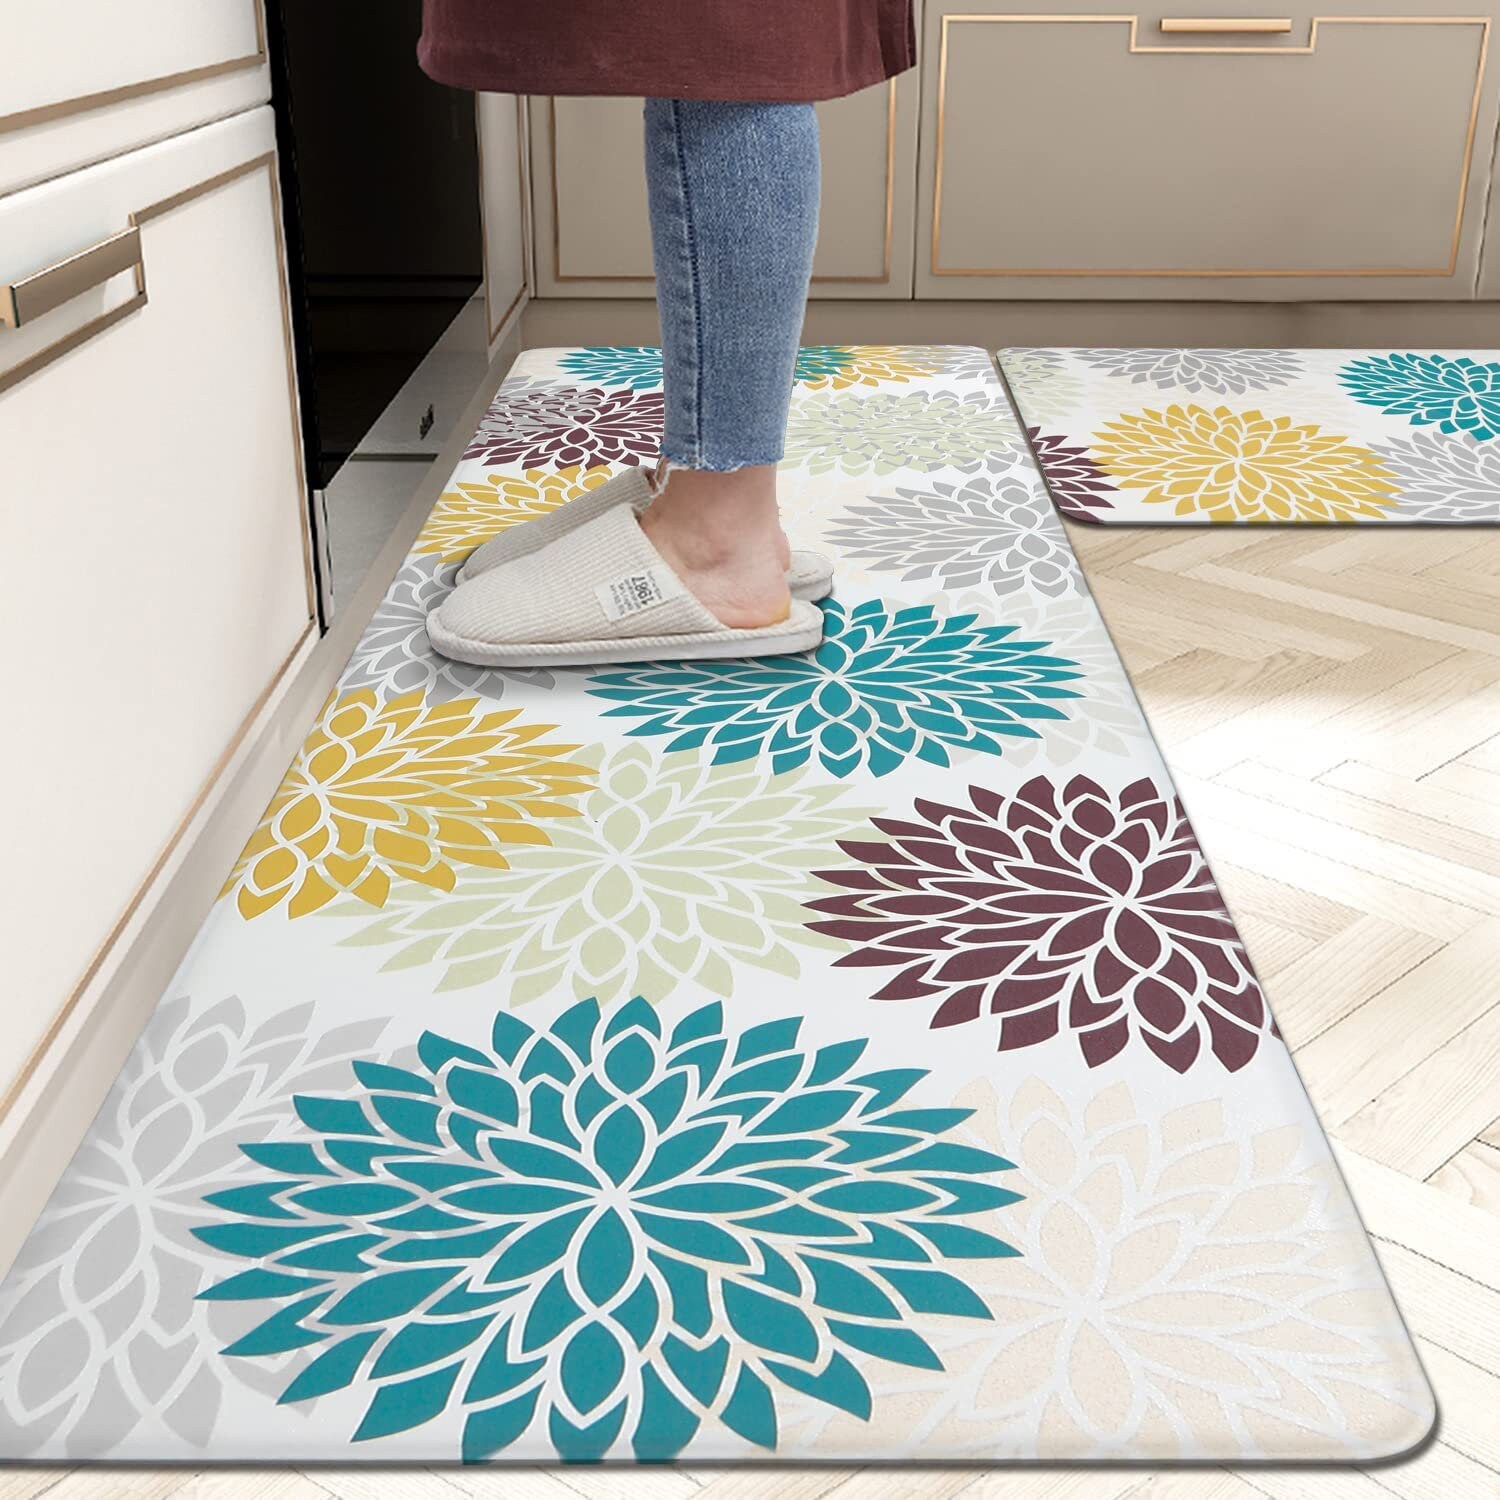  HEBE Boho Kitchen Rug Sets 3 Piece with Runner